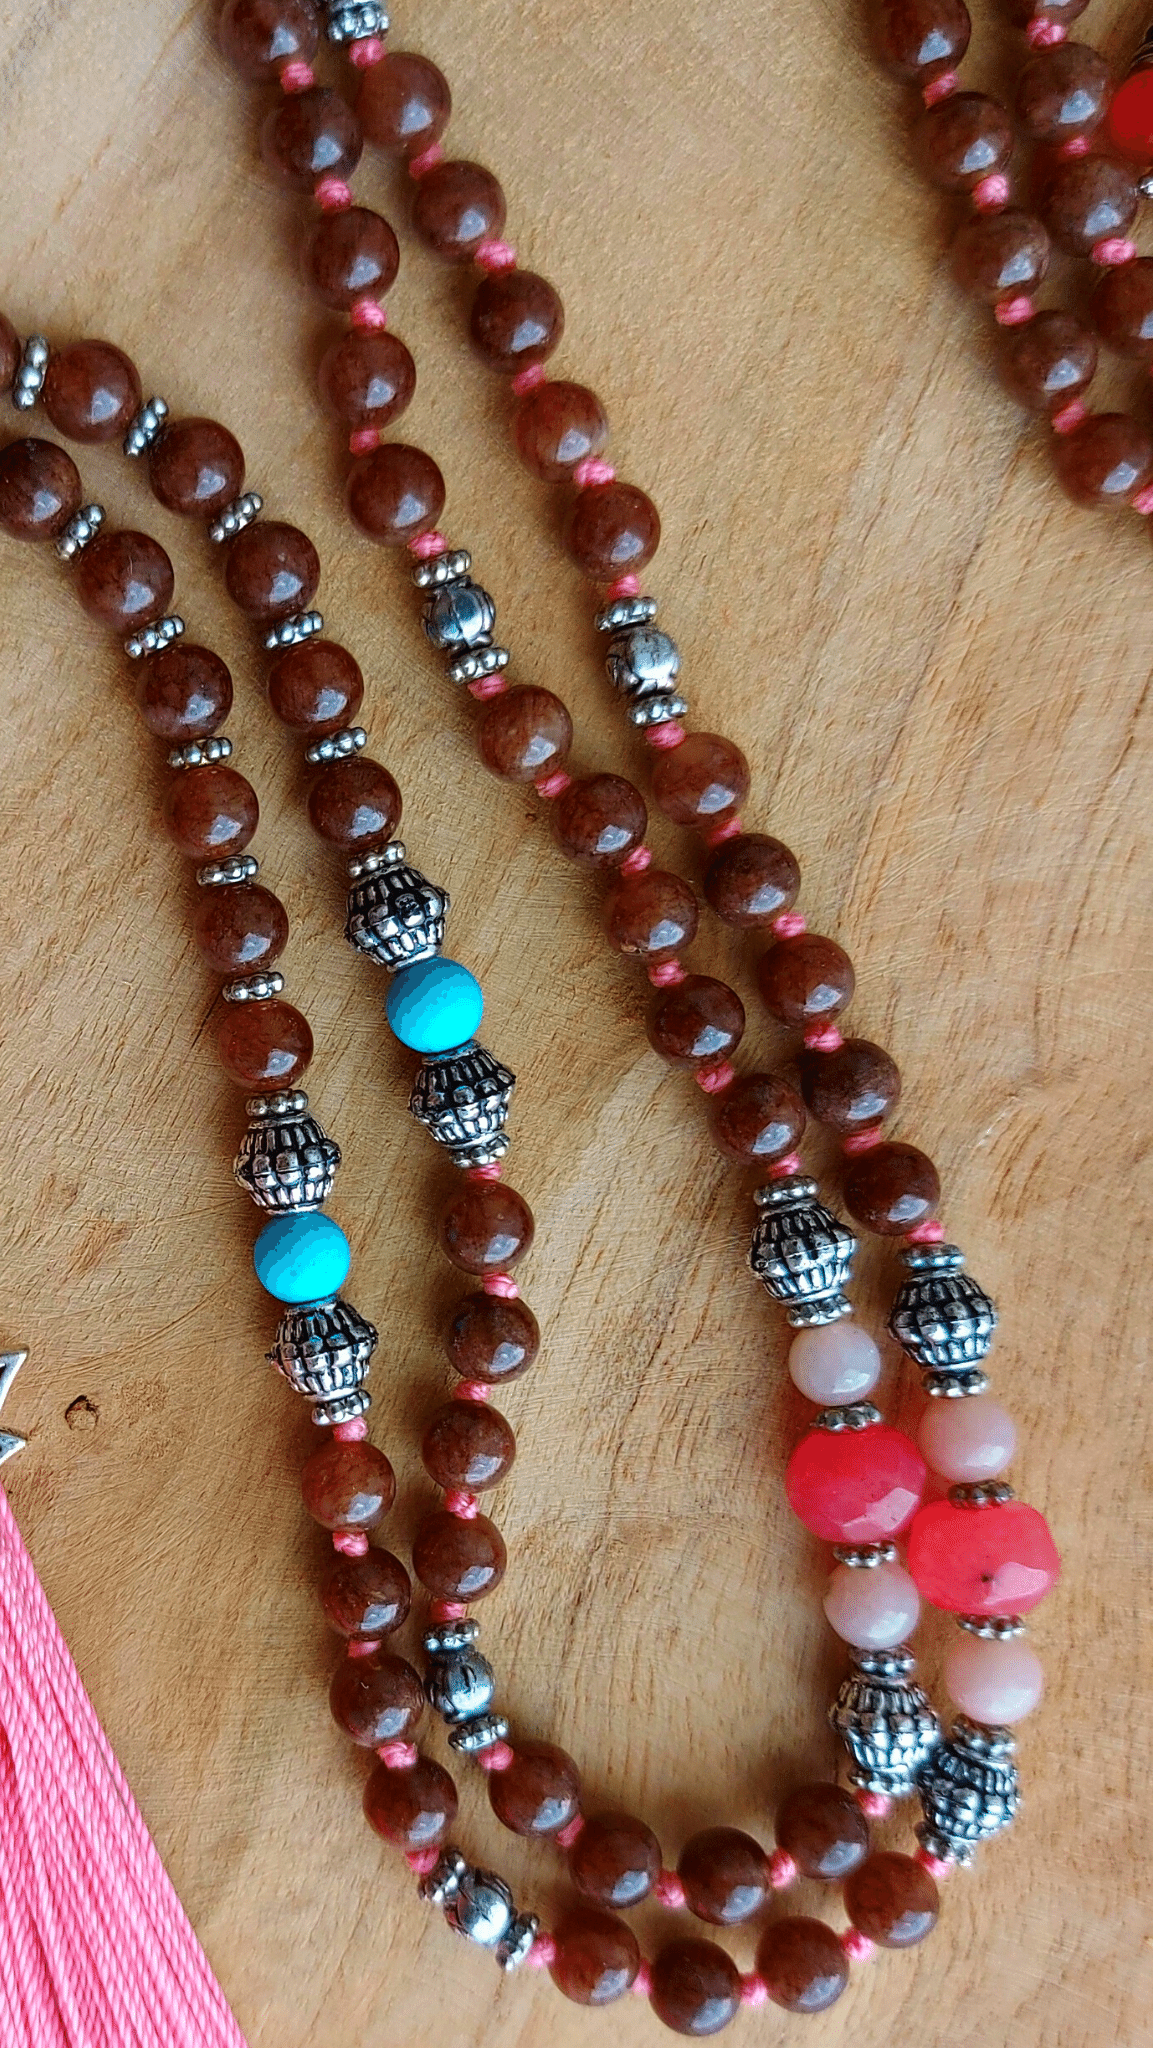 CALM MIND Mala Meditation Necklace with Brown, Oranje, Pink Agate, Blue Turquoise, Pink Green Persian Jade